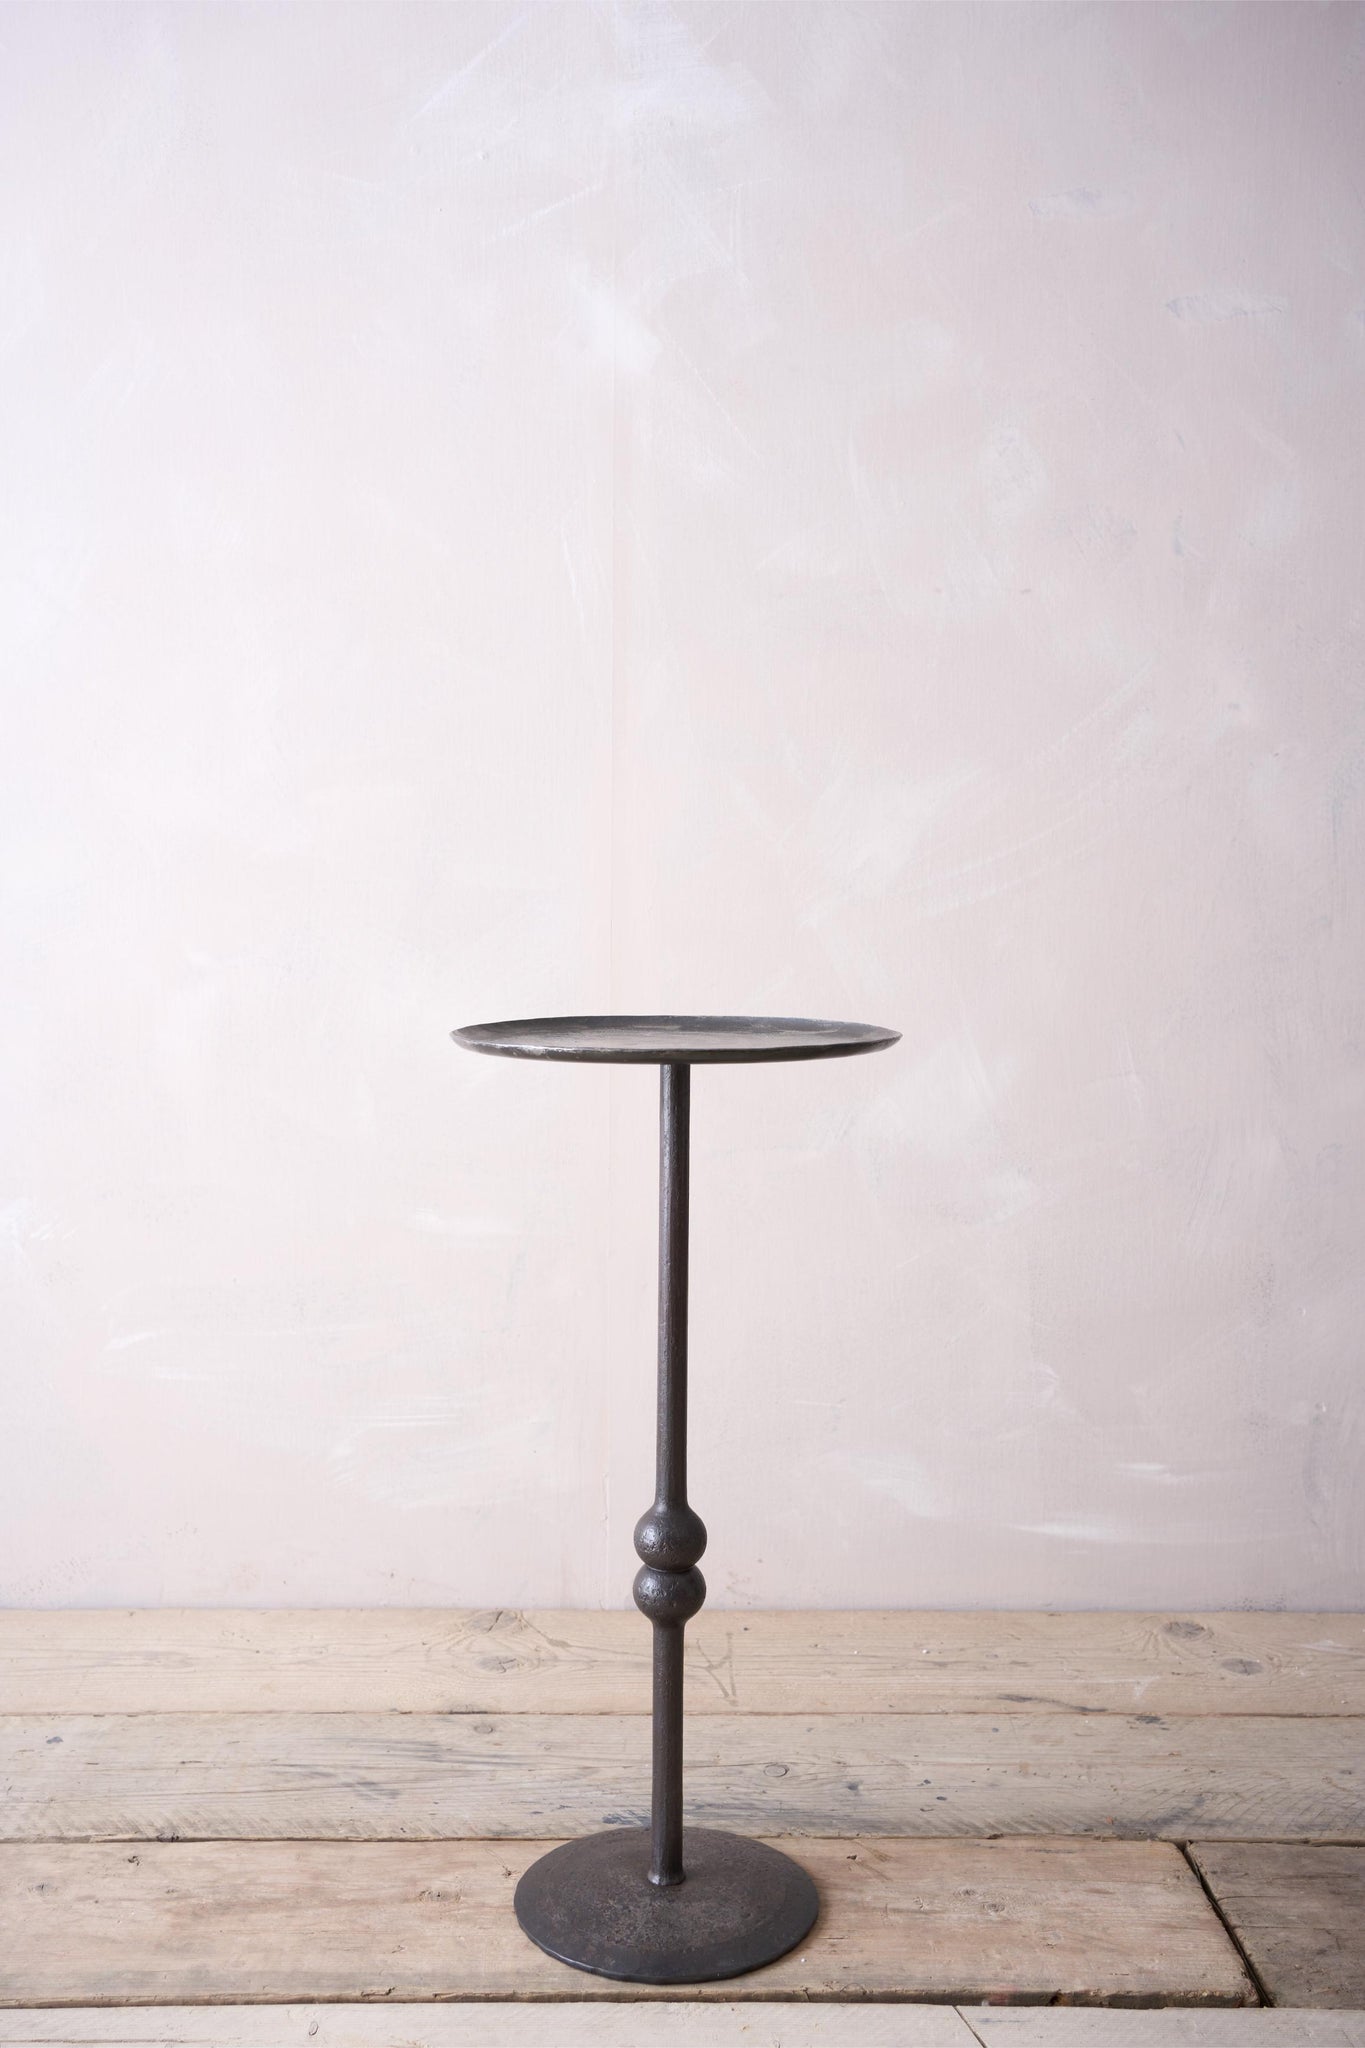 The 'Brokkr' forged steel martini table